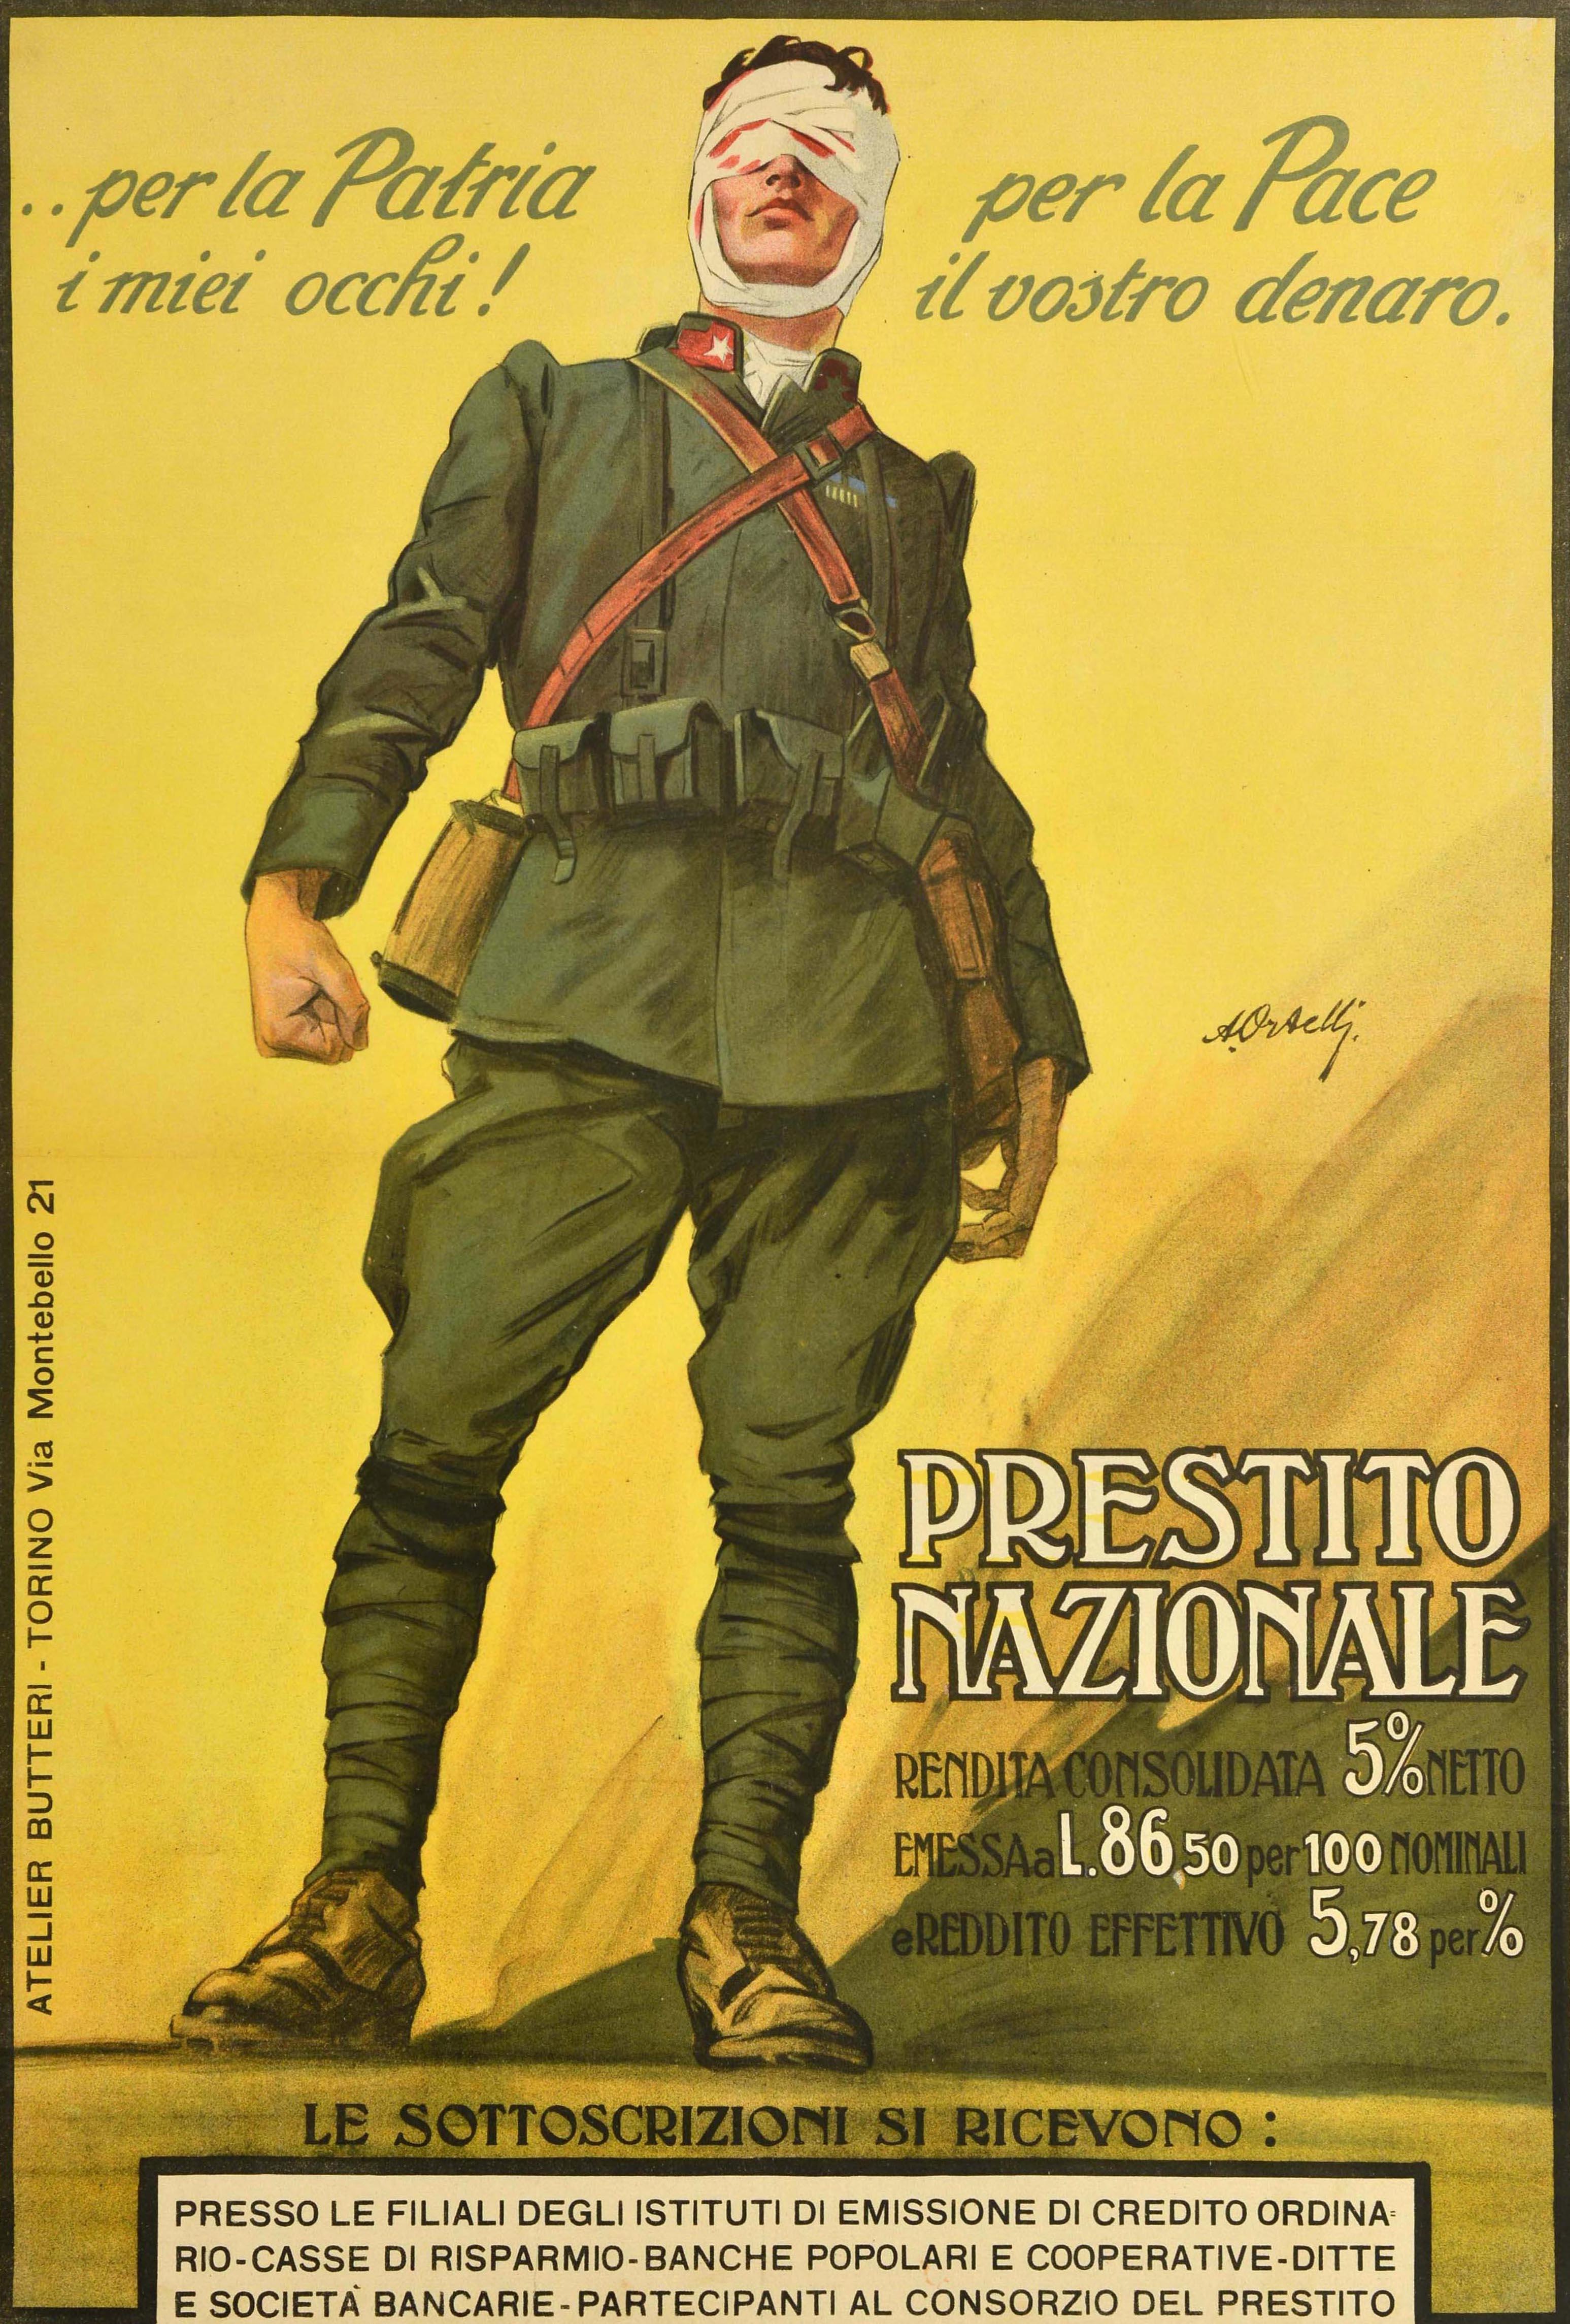 Original antique World War One war bond poster for the National Loan / Prestito Nazionale featuring an image of a Bersaglieri soldier in military uniform standing against a yellow shaded background with a blood stained gauze bandage wrapped around